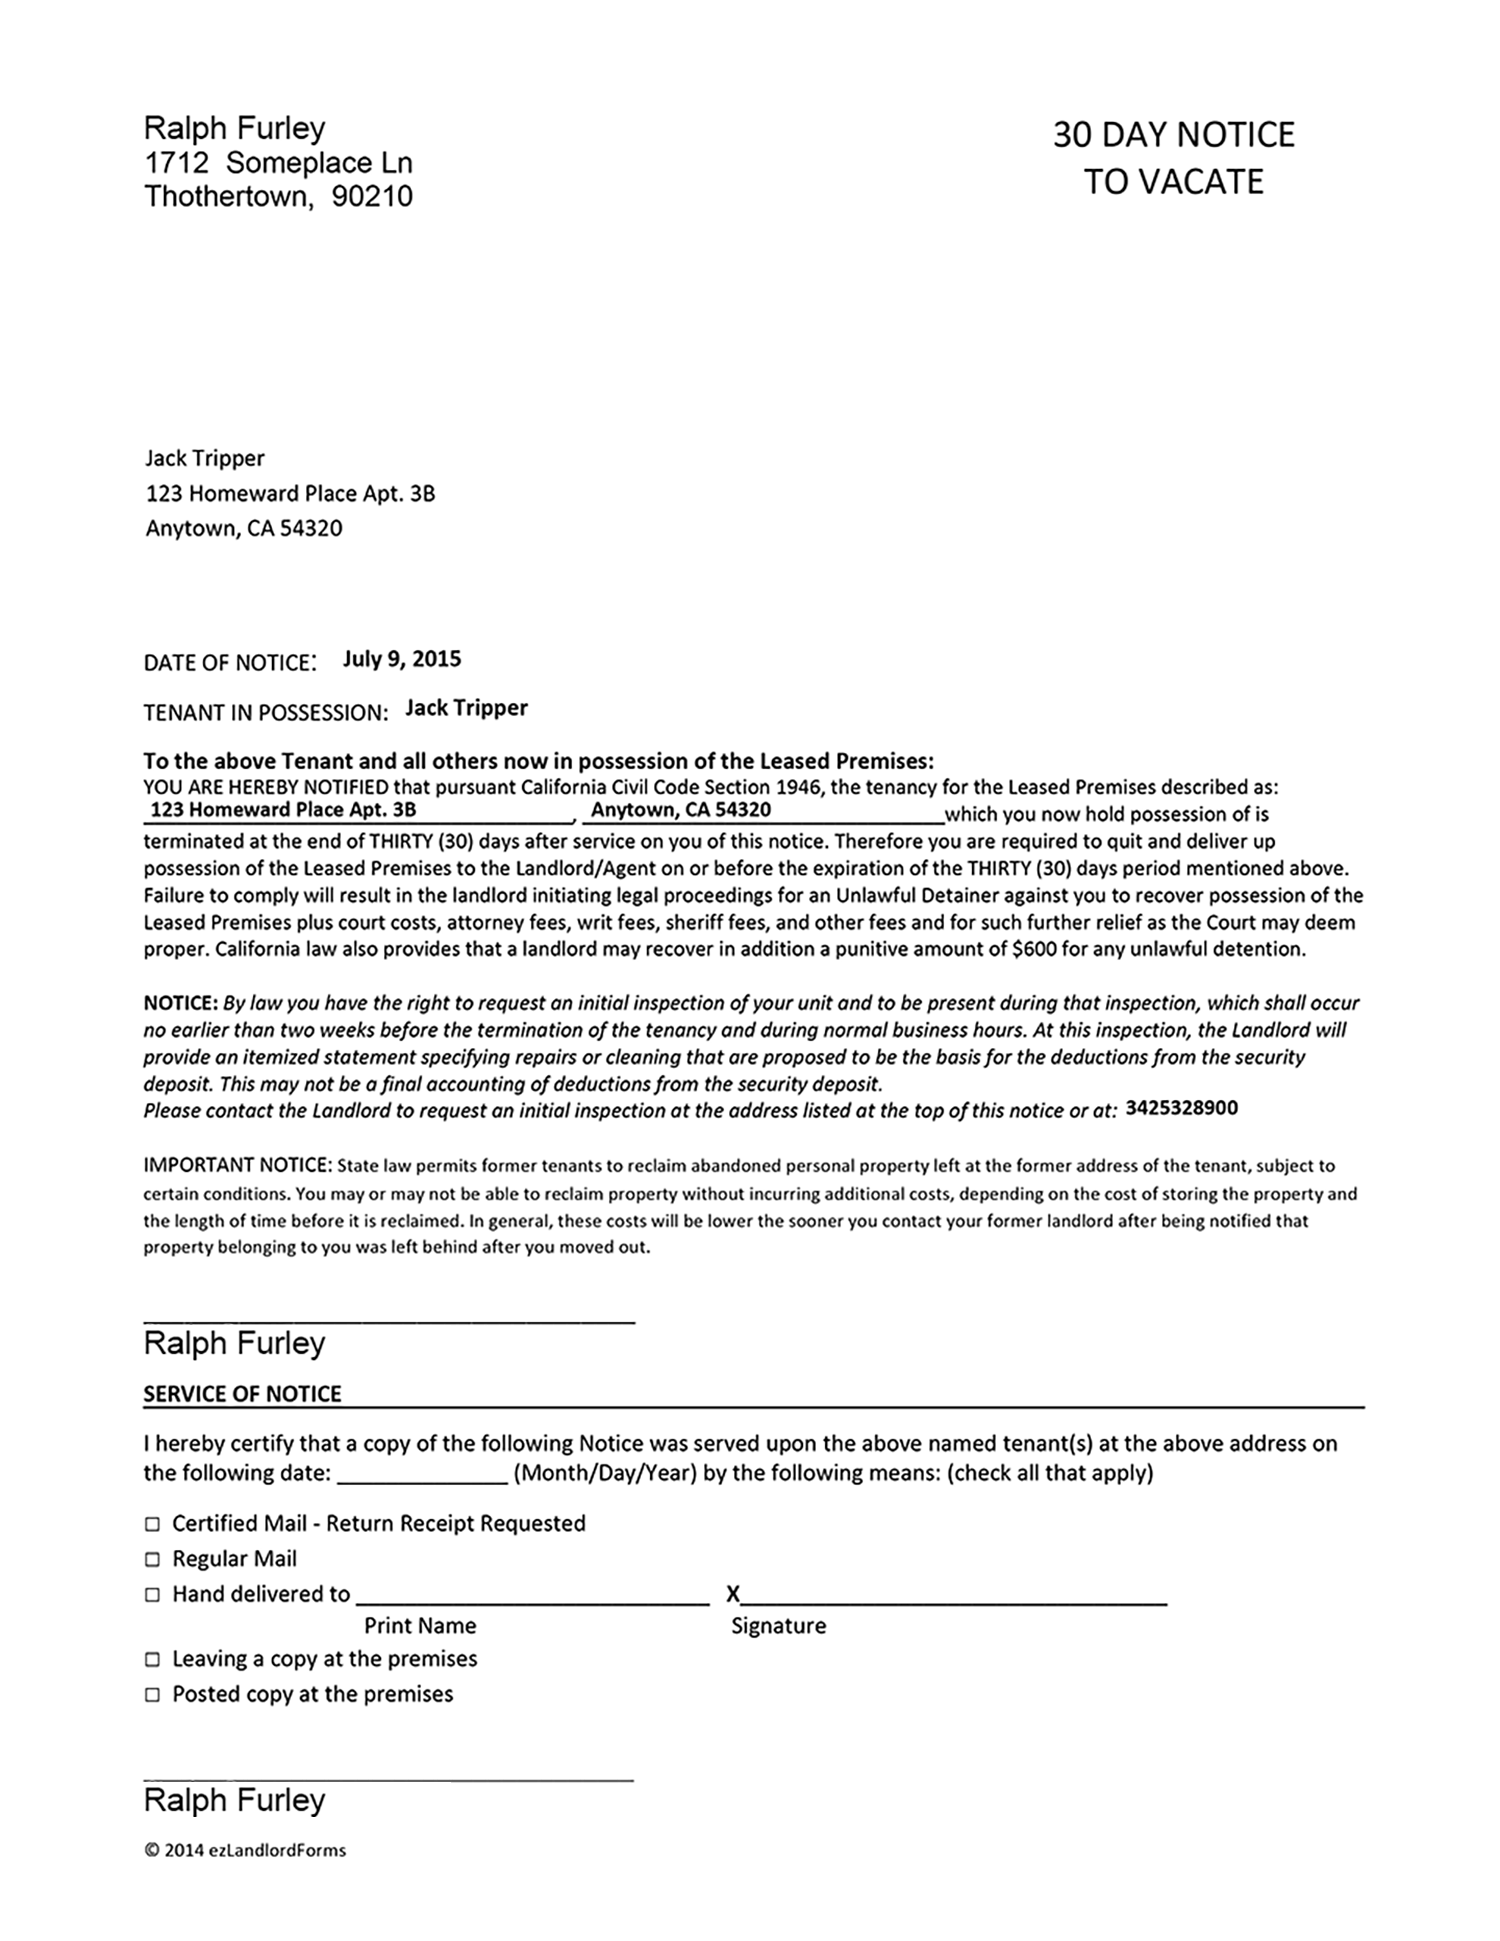 30-day-notice-to-vacate-letter-to-tenant-template-resume-letter